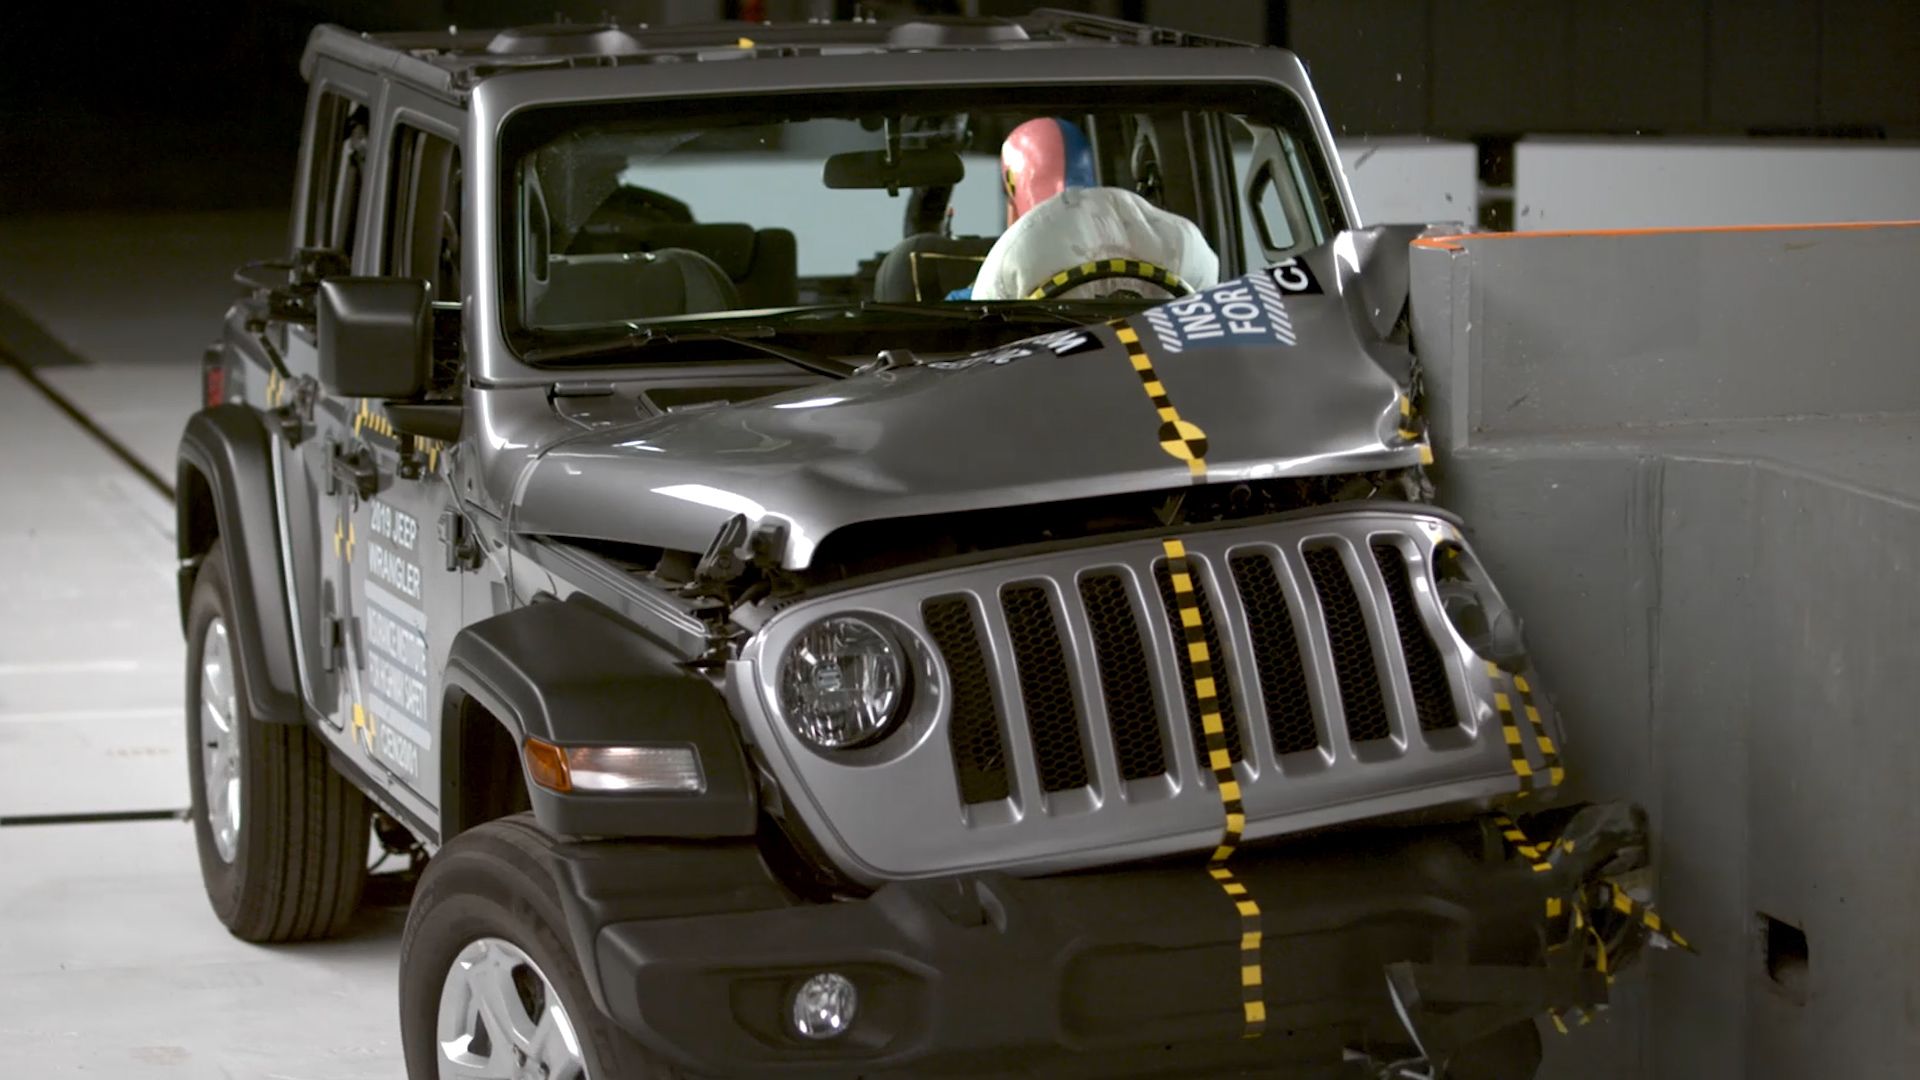 Watch this Jeep crash and then tip over in test | CNN Business